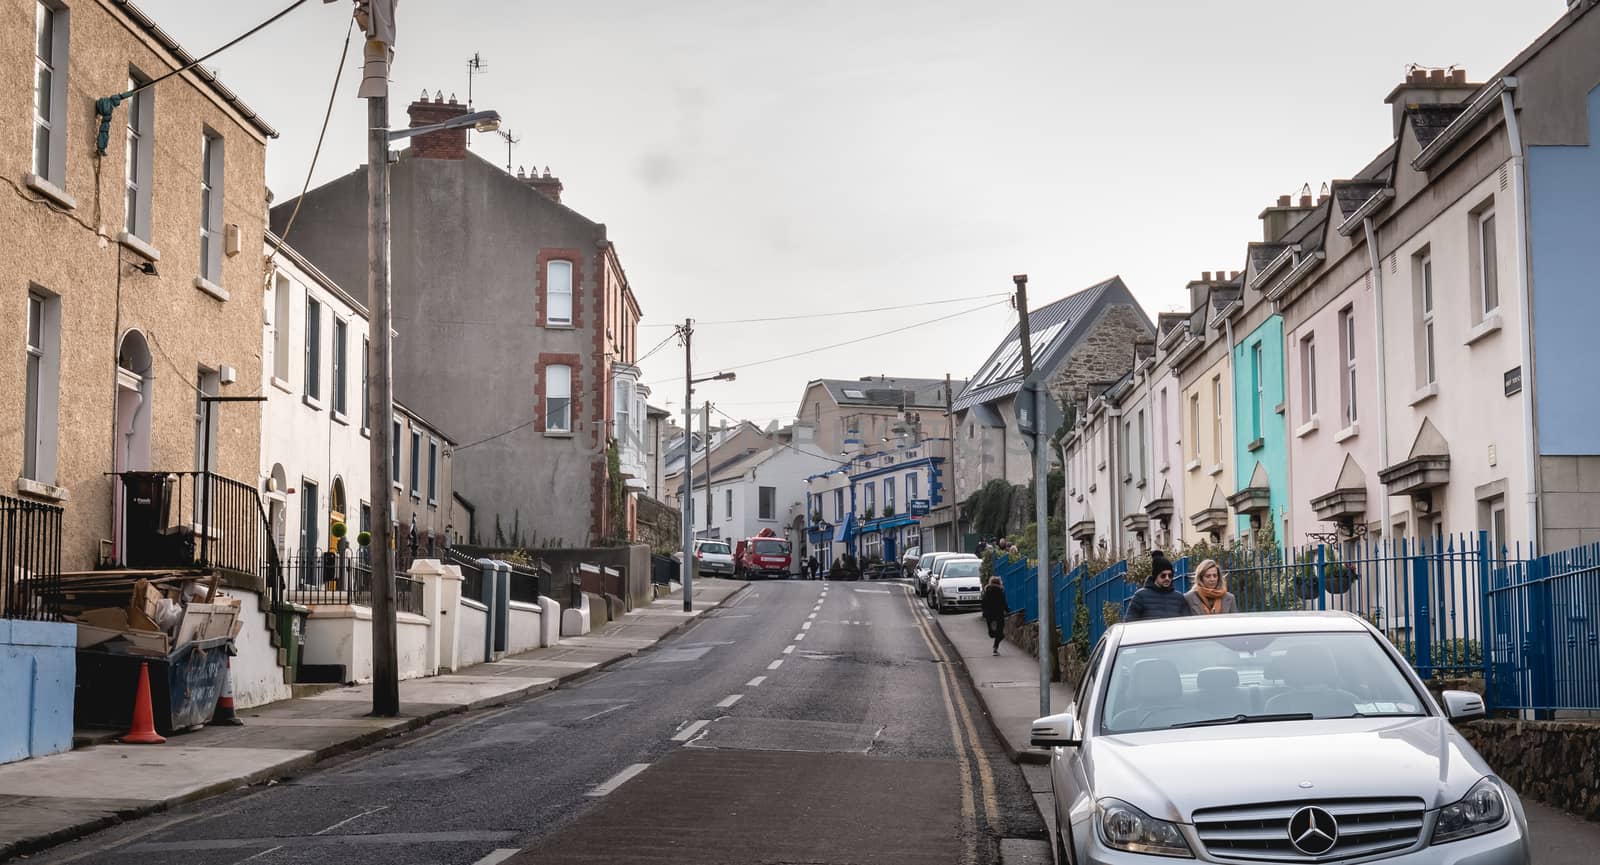 Howth, Ireland - February 15, 2019: Typical architecture of town center houses in a small fishing port near Dublin on a winter day